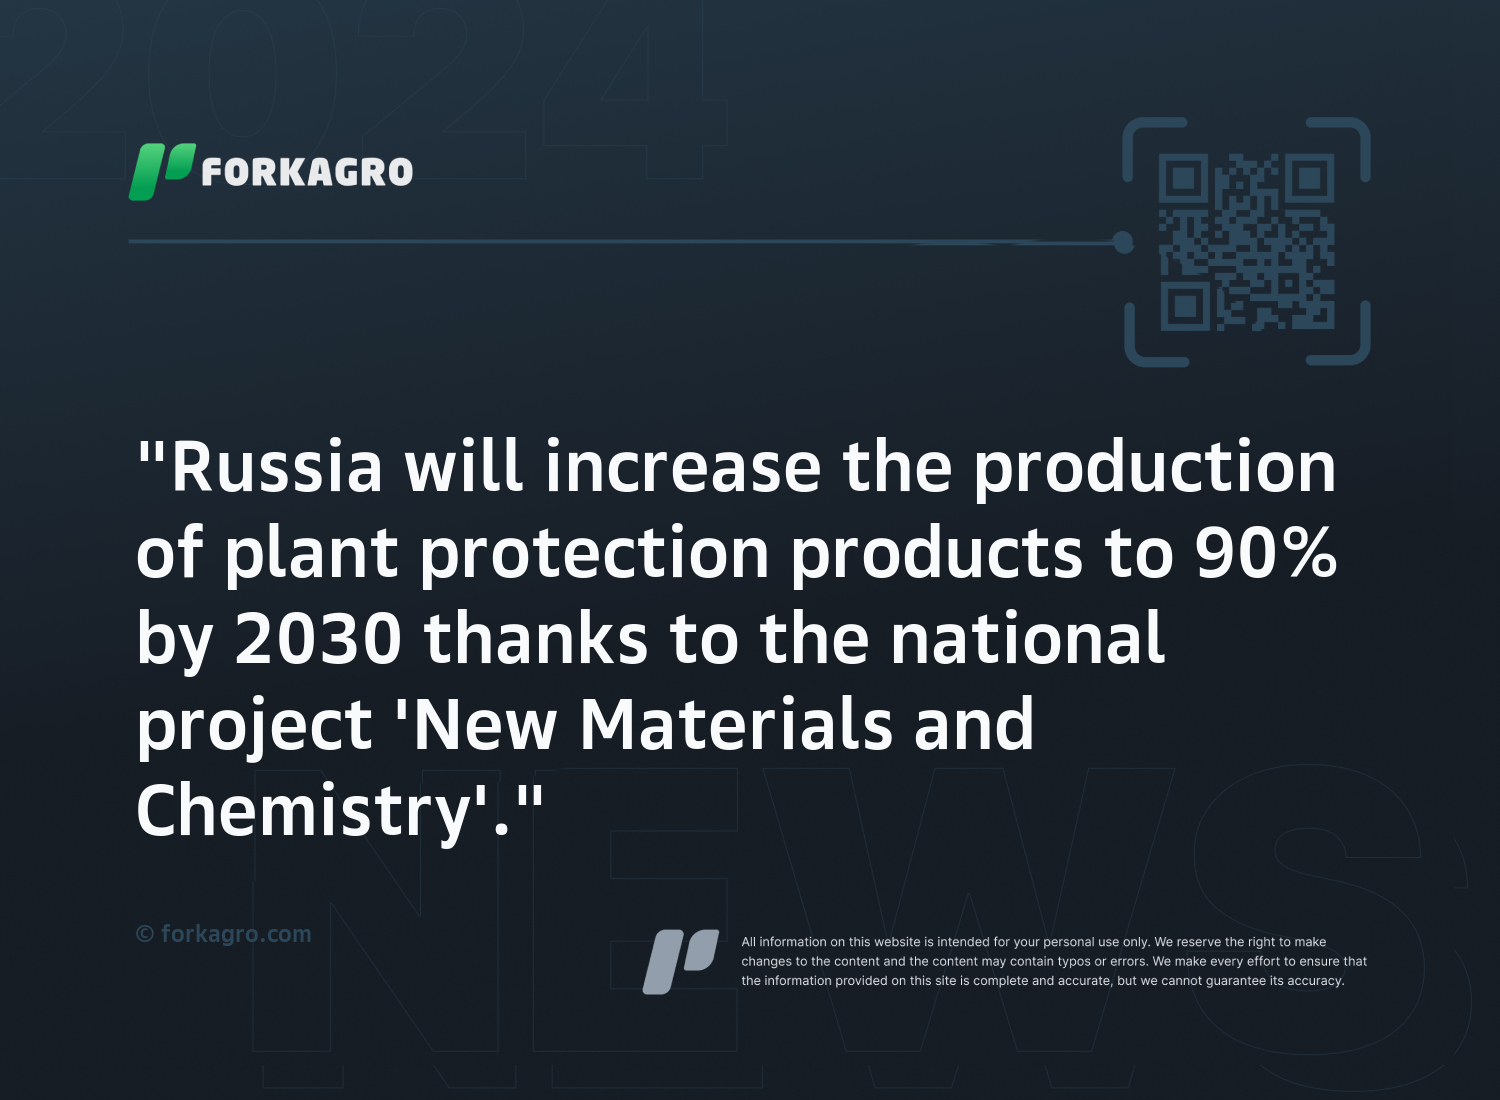 "Russia will increase the production of plant protection products to 90% by 2030 thanks to the national project 'New Materials and Chemistry'."